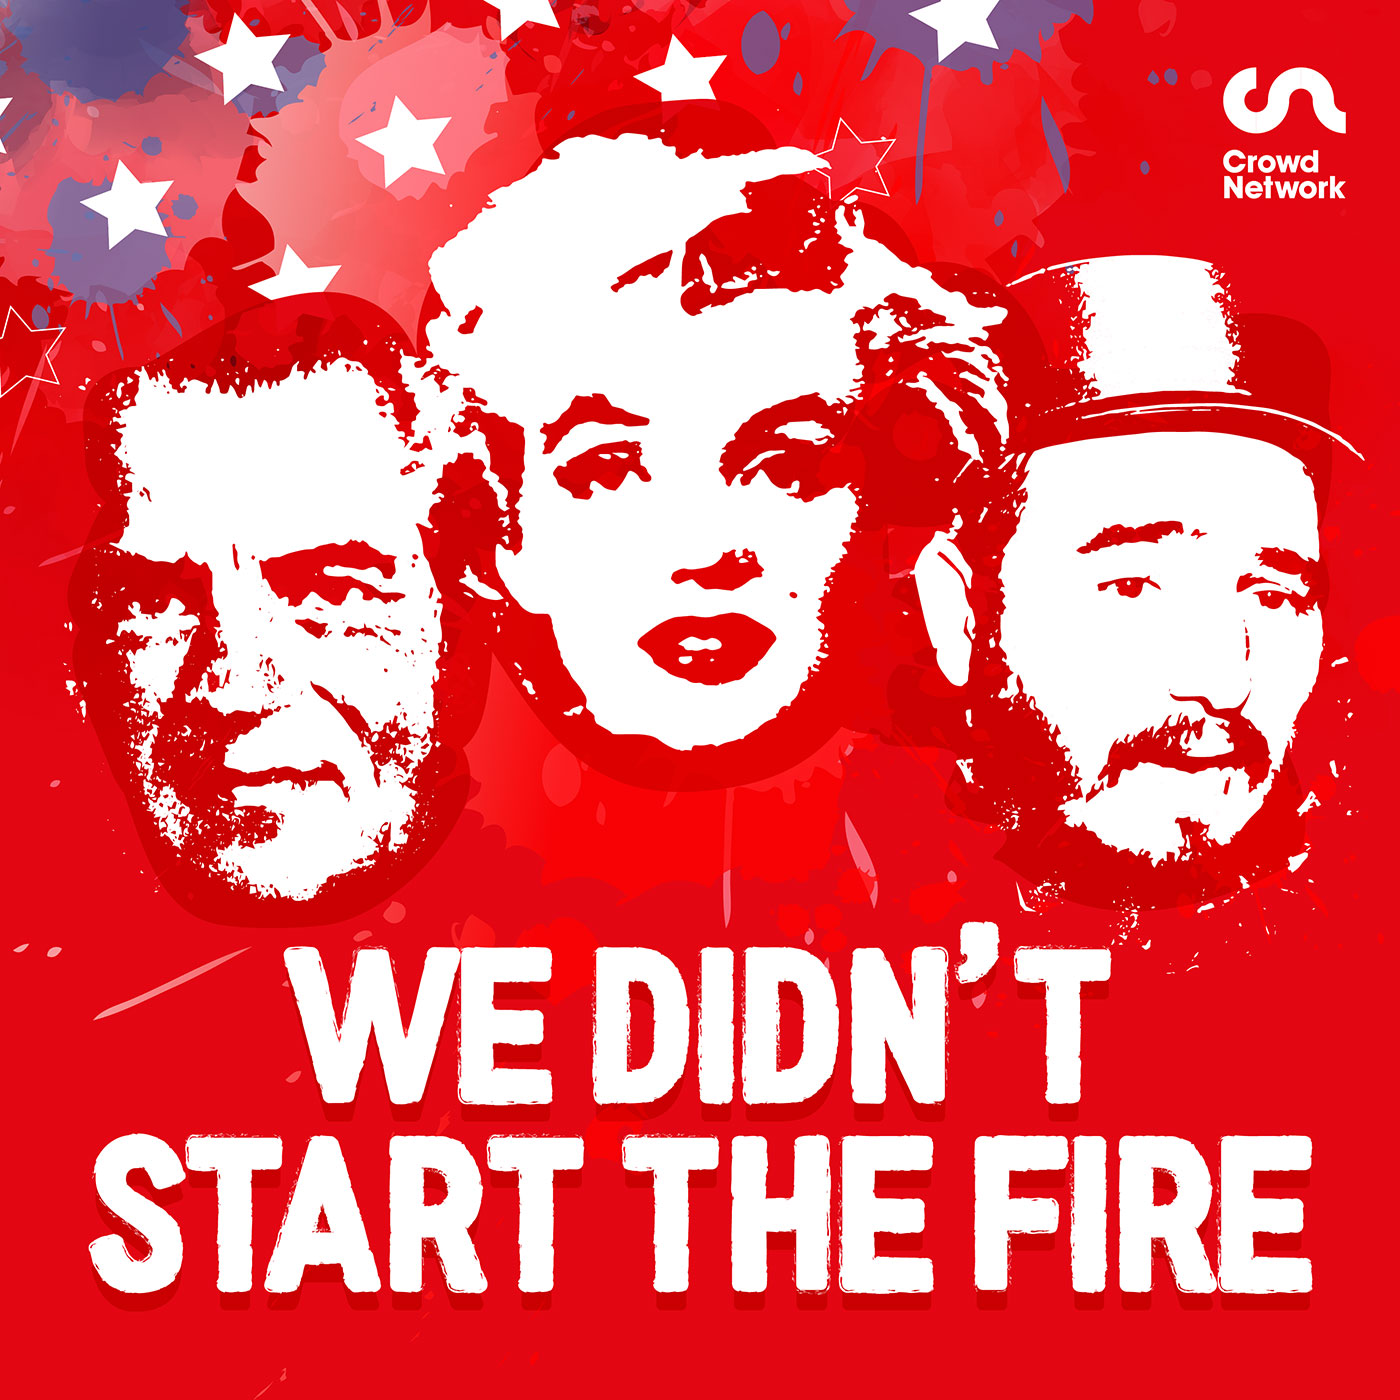 We Didn’t Start The Fire: lyrical history podcast launched by Crowd